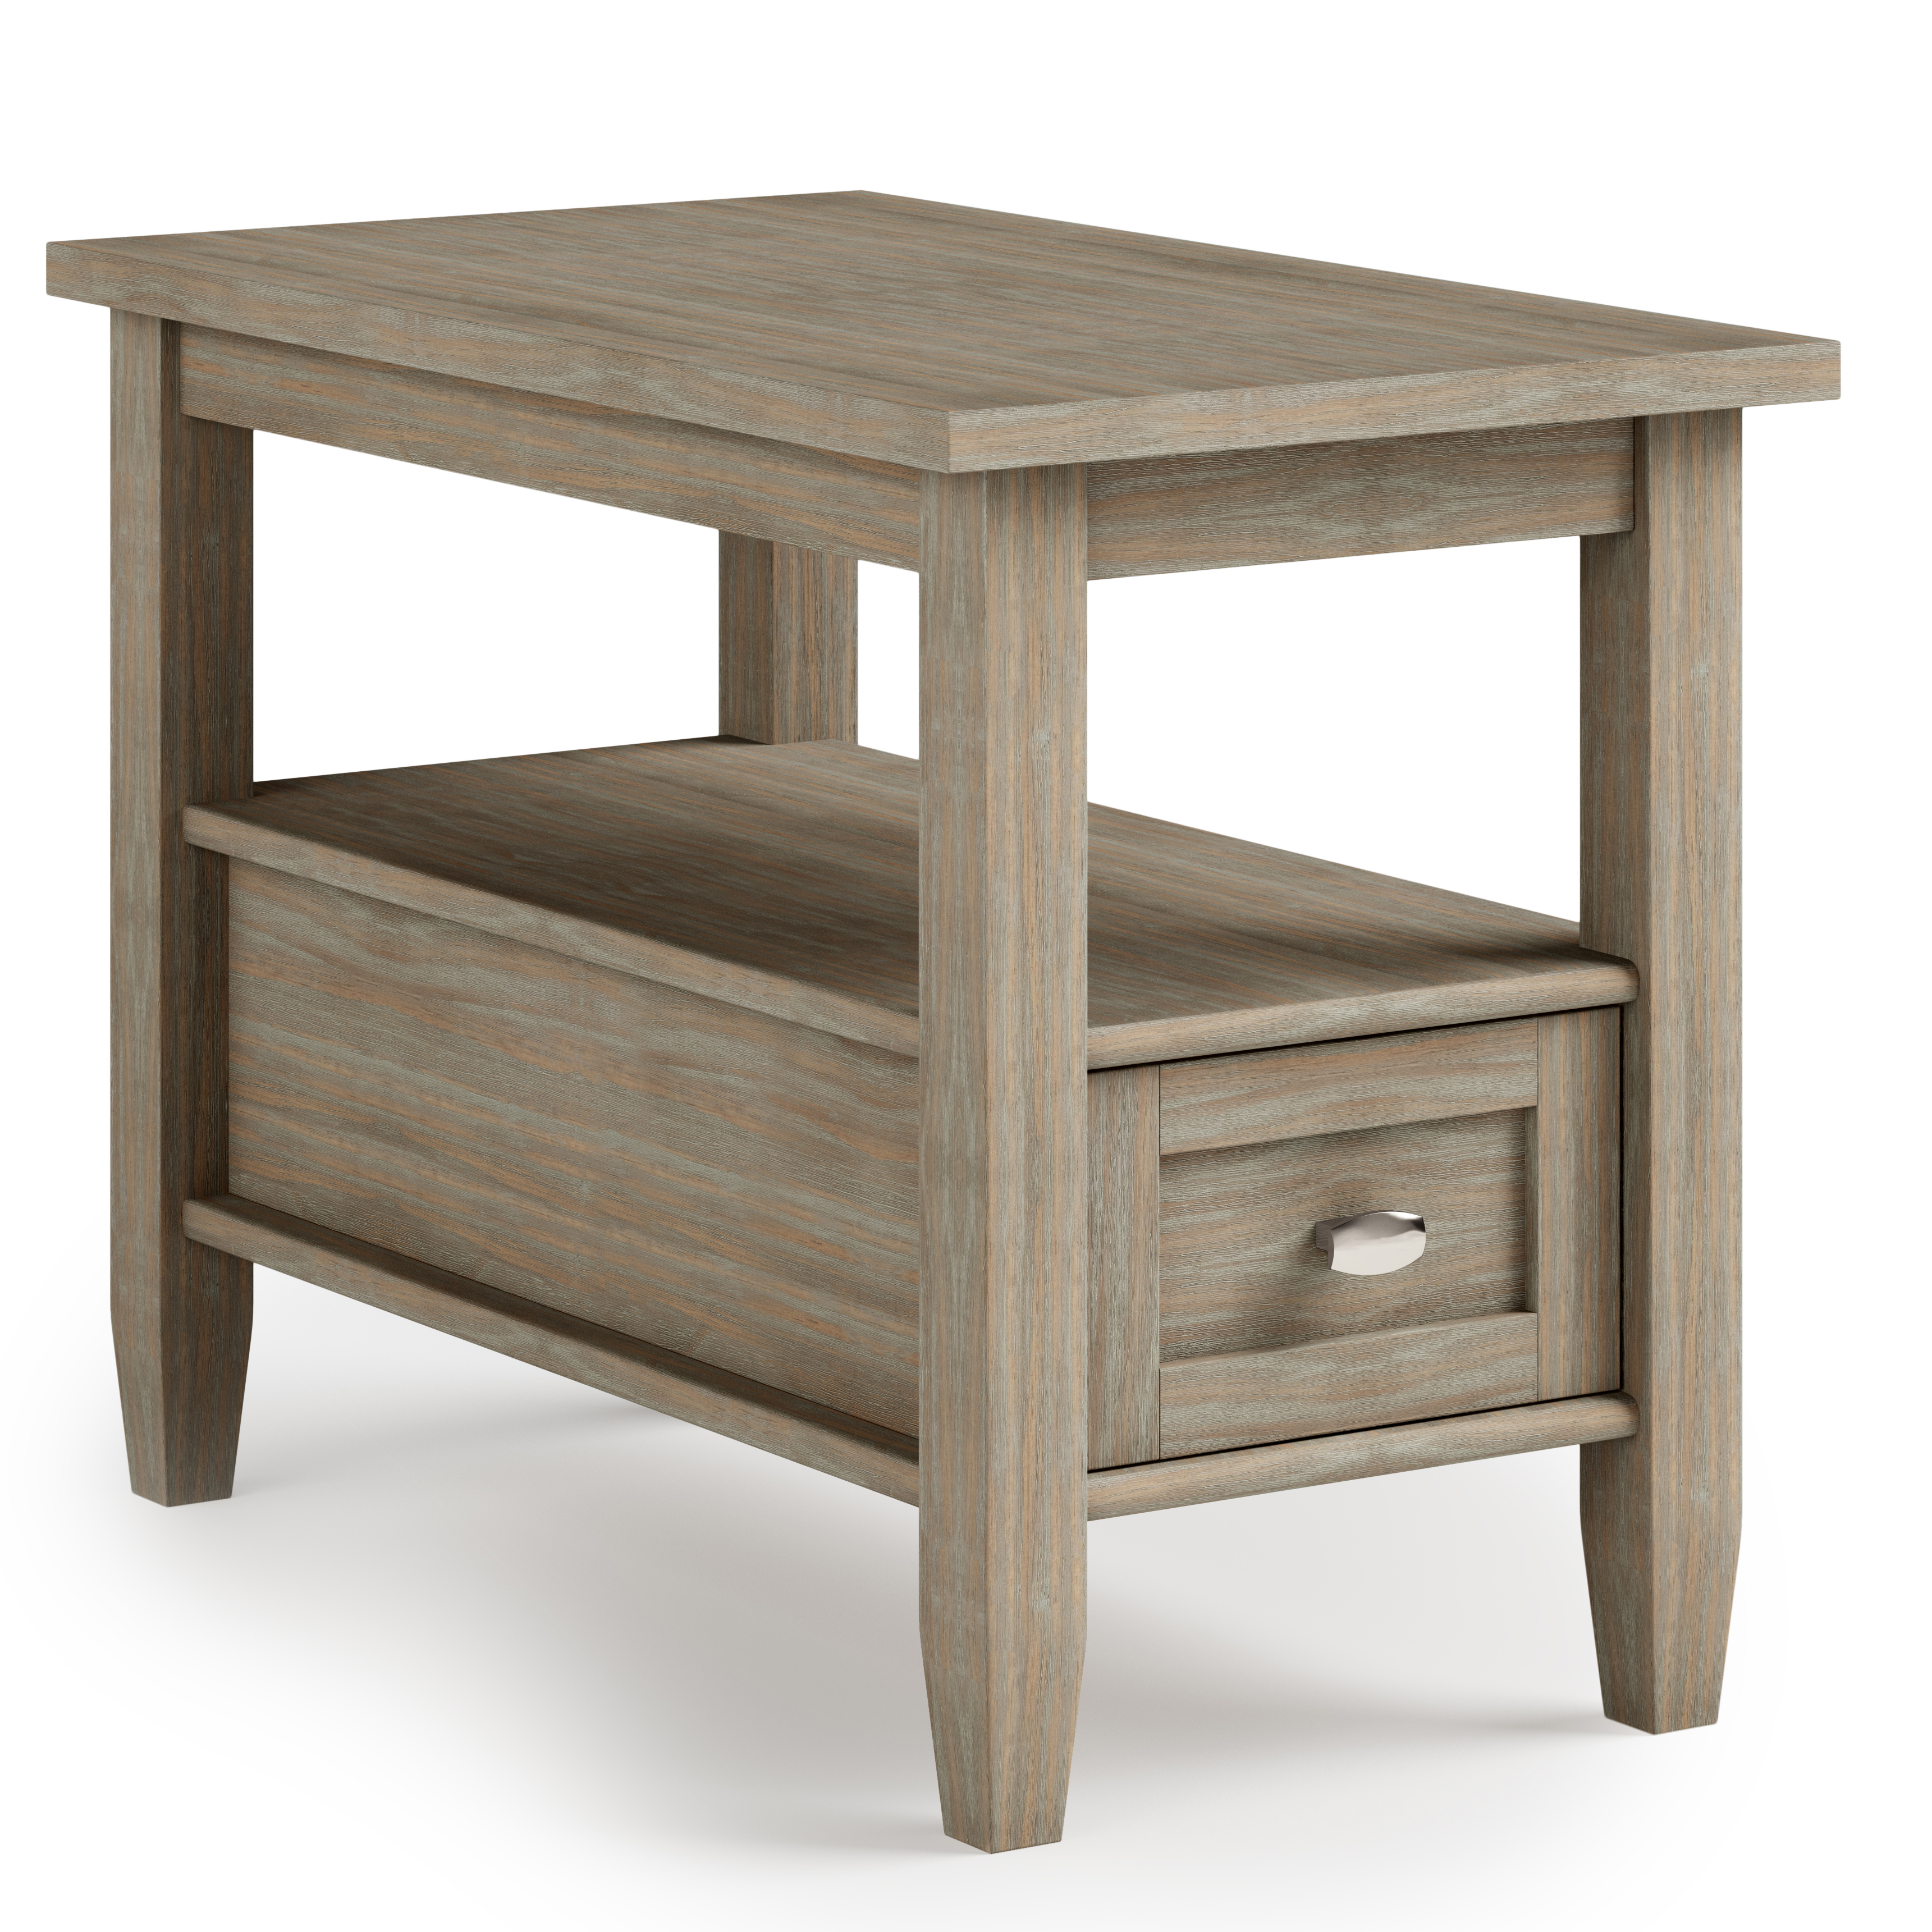 Simpli Home Warm Shaker SOLID WOOD Narrow Side Table in Distressed Grey